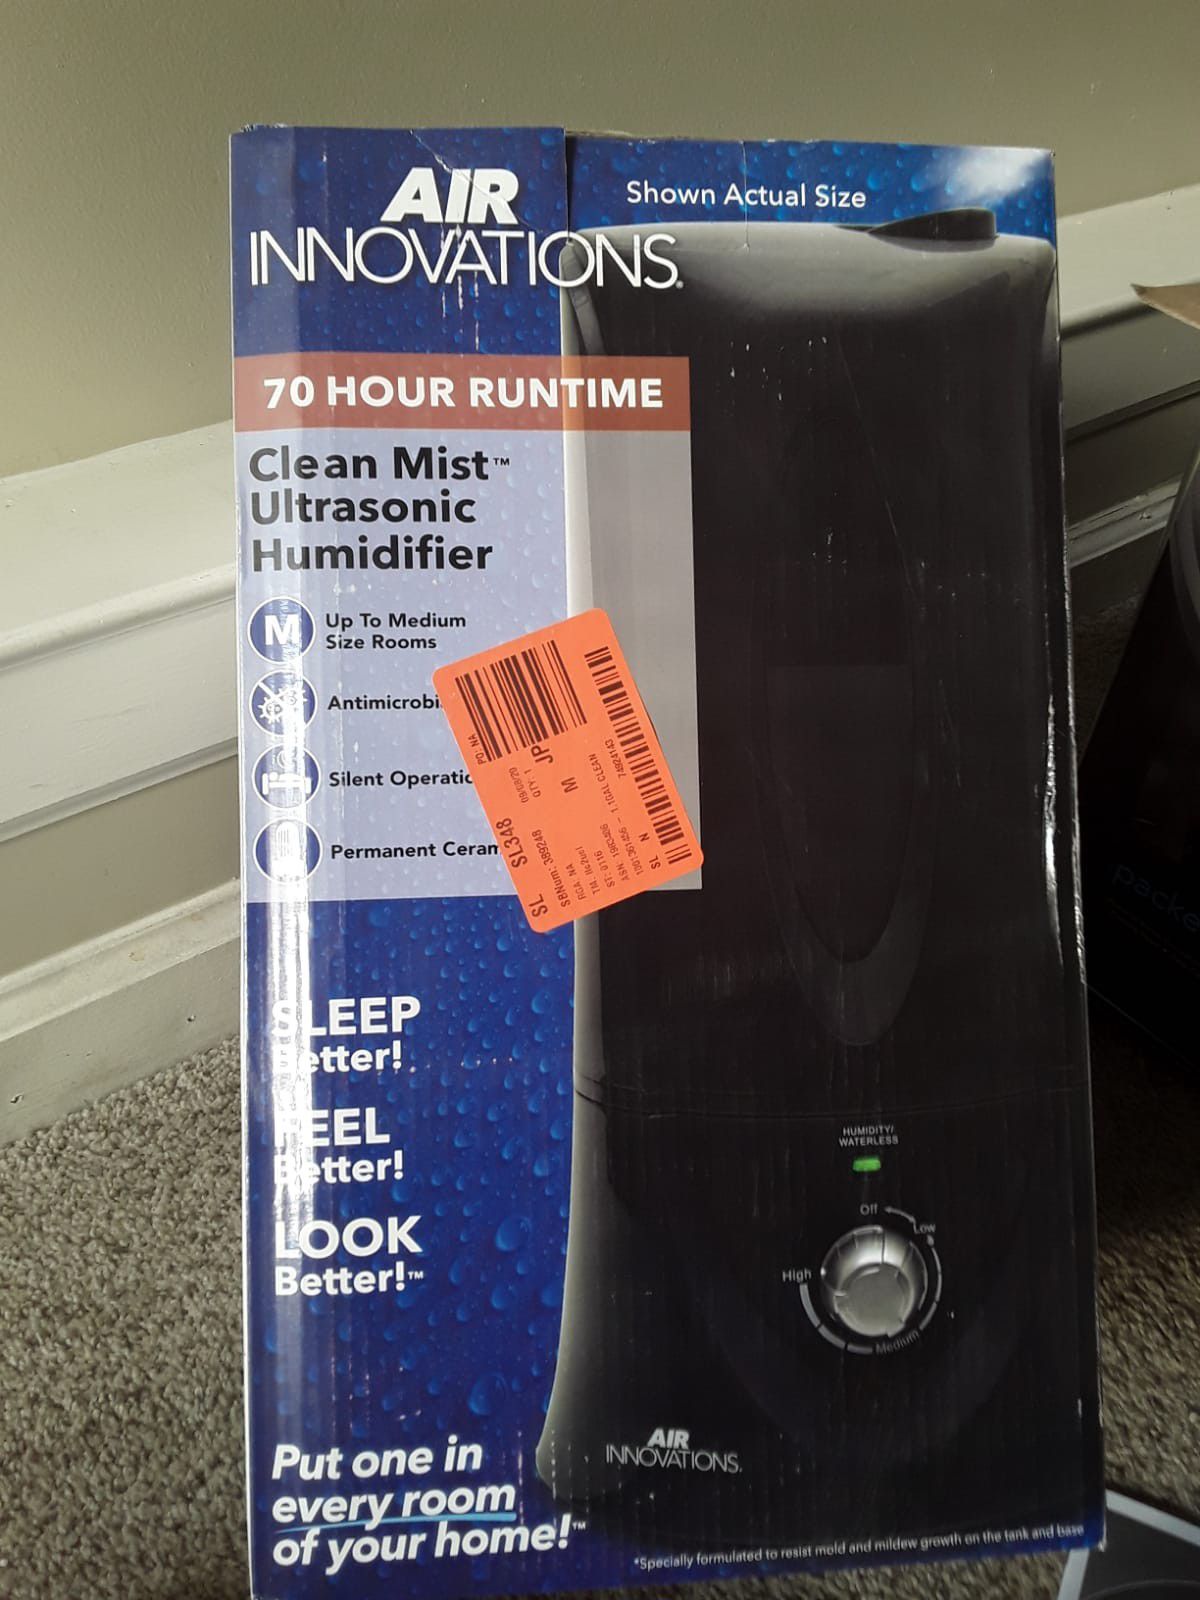 New air innovations humidifier